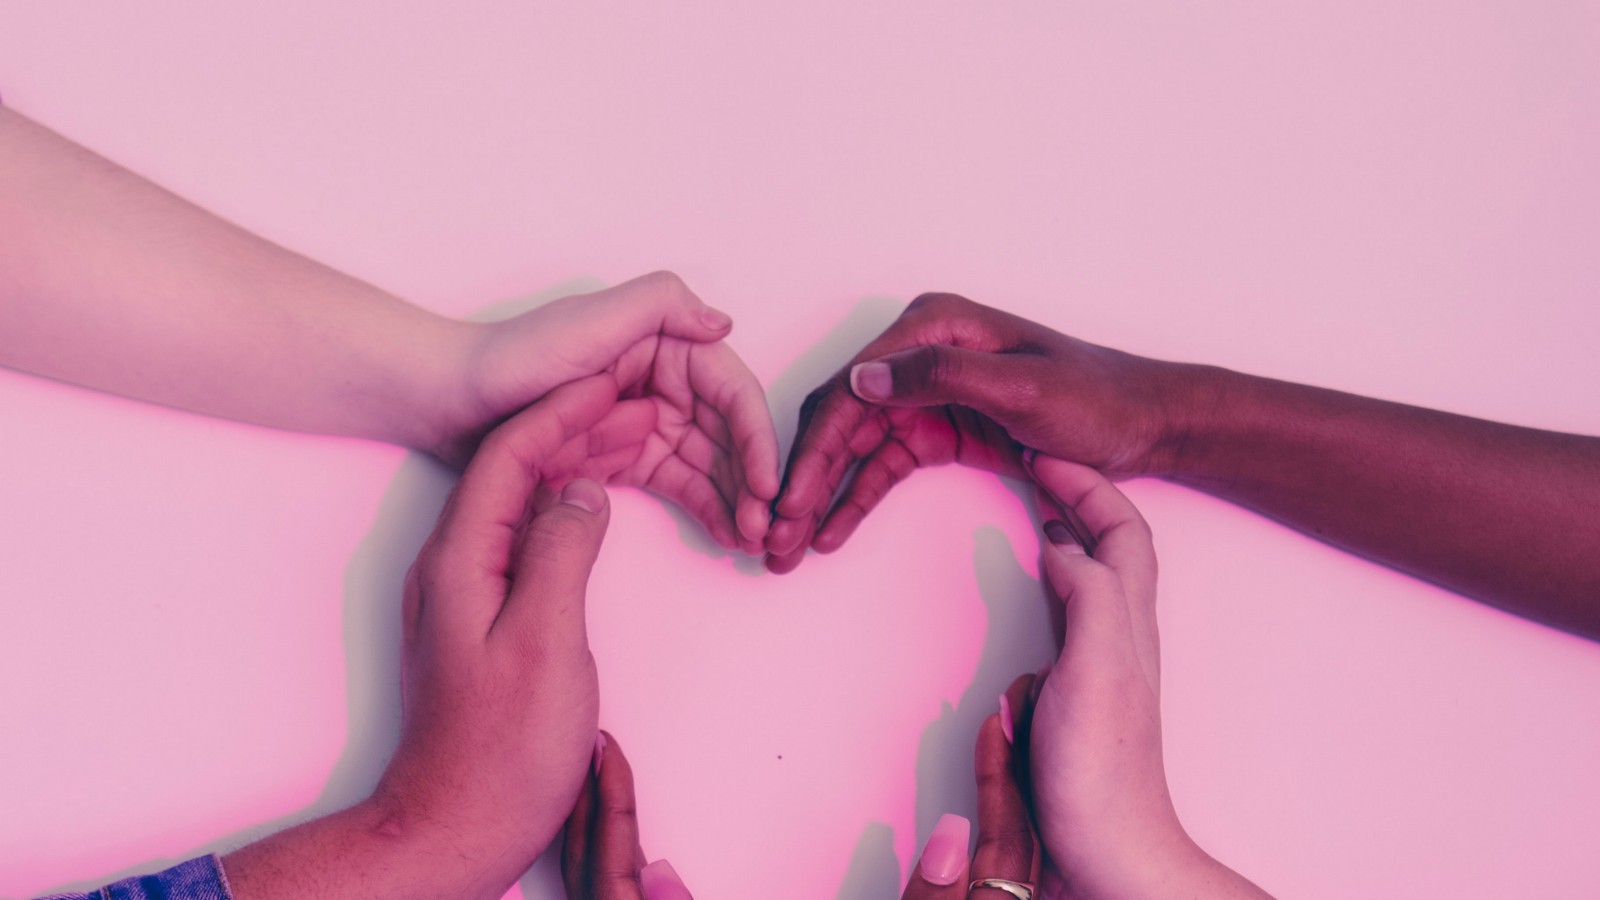 photo of hands of multiple skin tones placed in shape of heart. Photo on Dr. James Goydos post about skin cancer prevention.